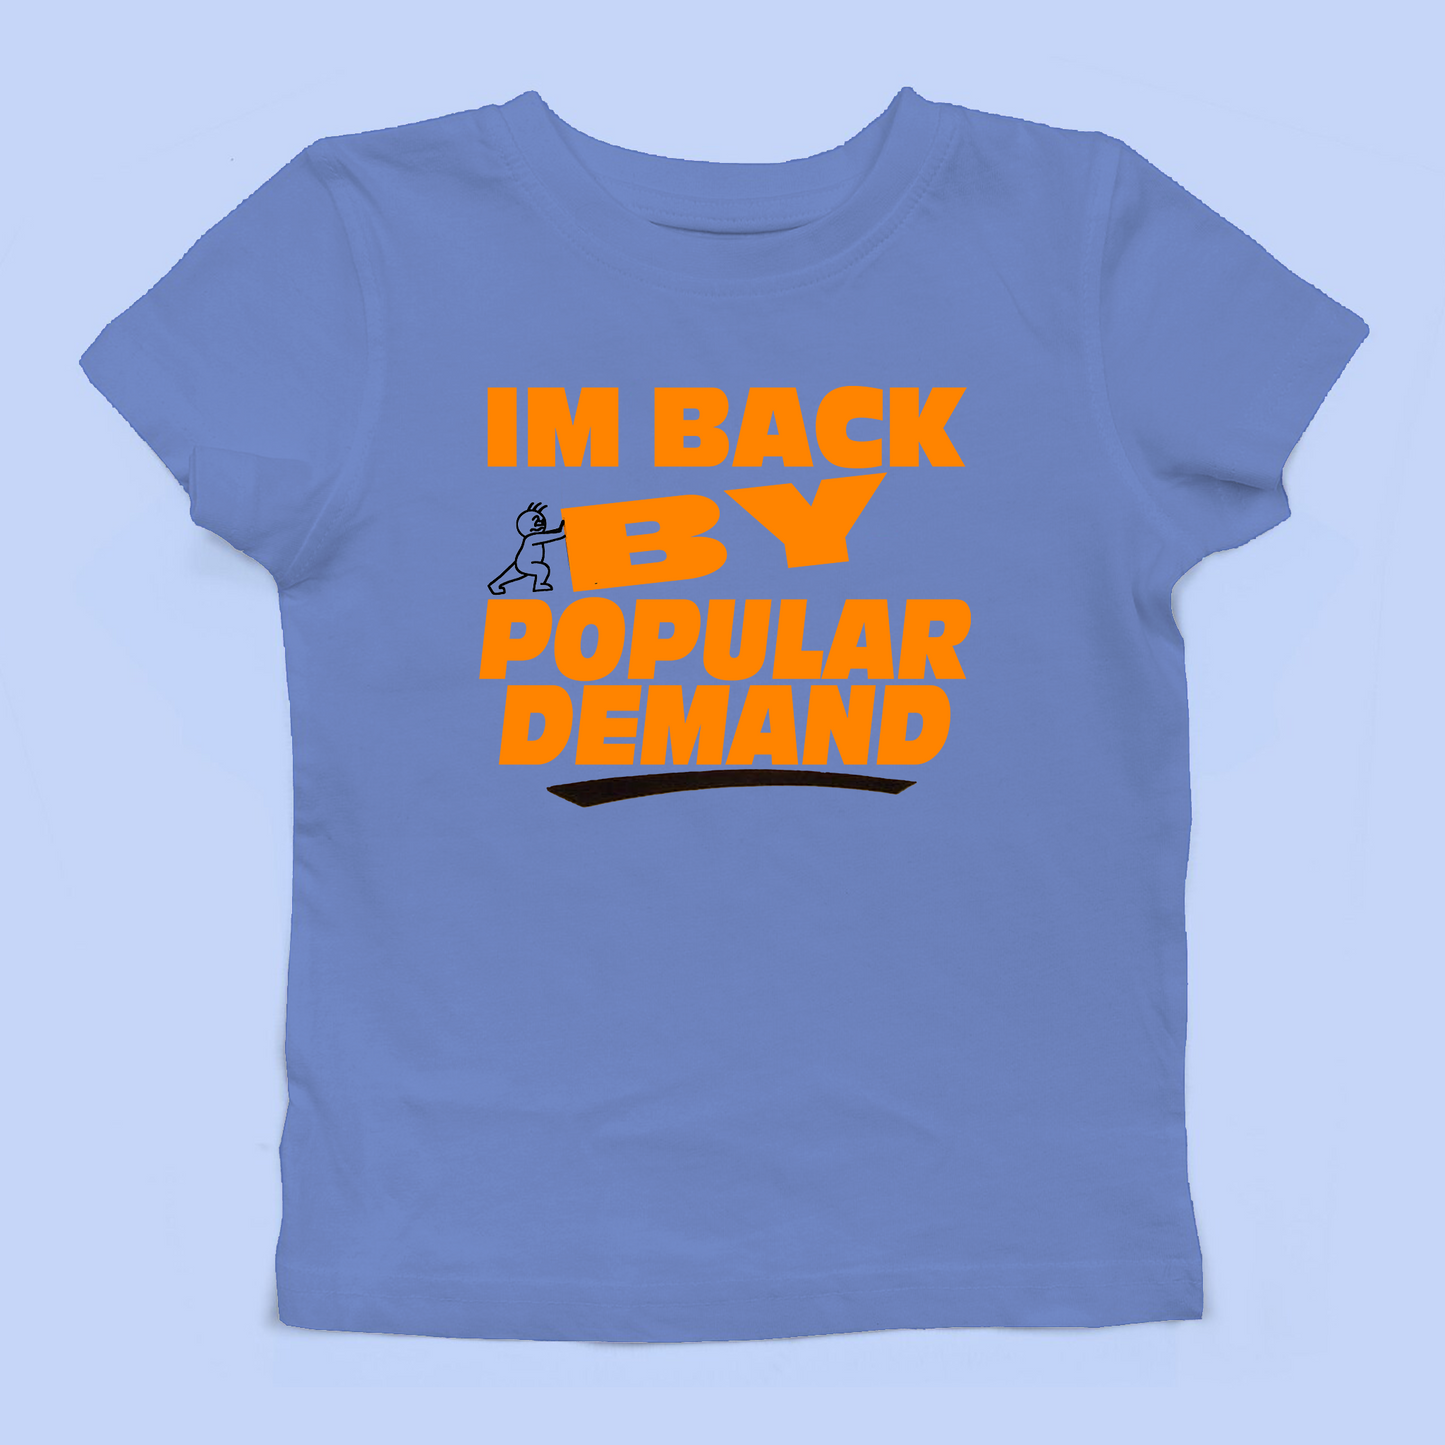 I'M Back By Popular Demand Baby Tee